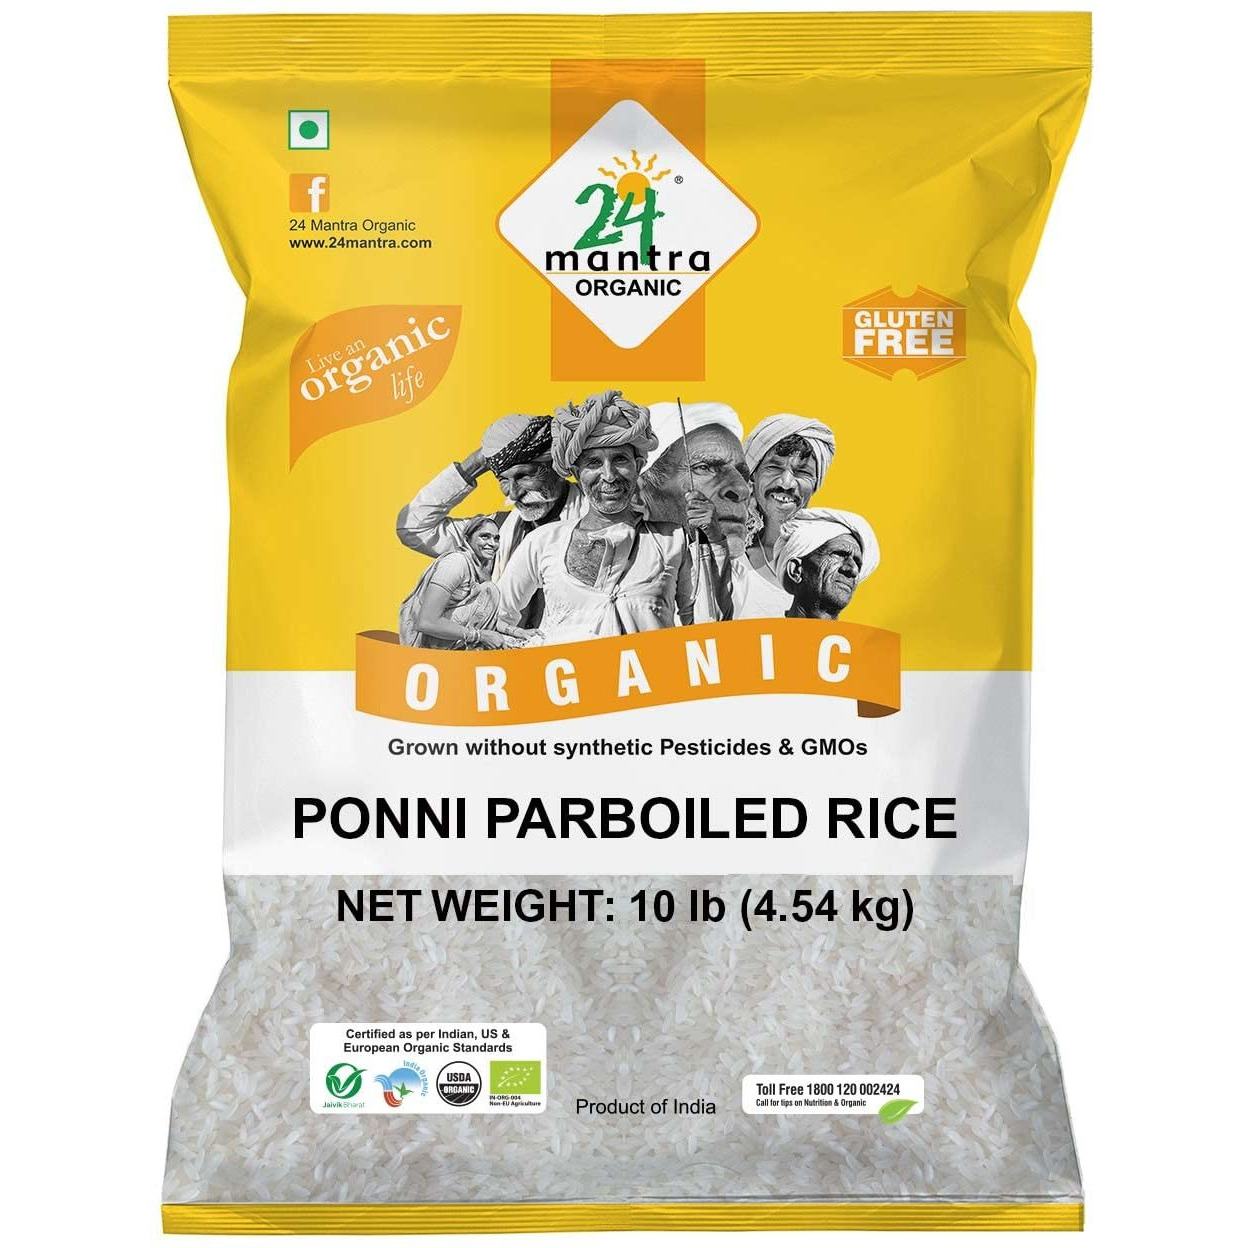 Case of 4 - 24 Mantra Organic Ponni Parboiled Rice - 10 Lb (4.5 Kg)